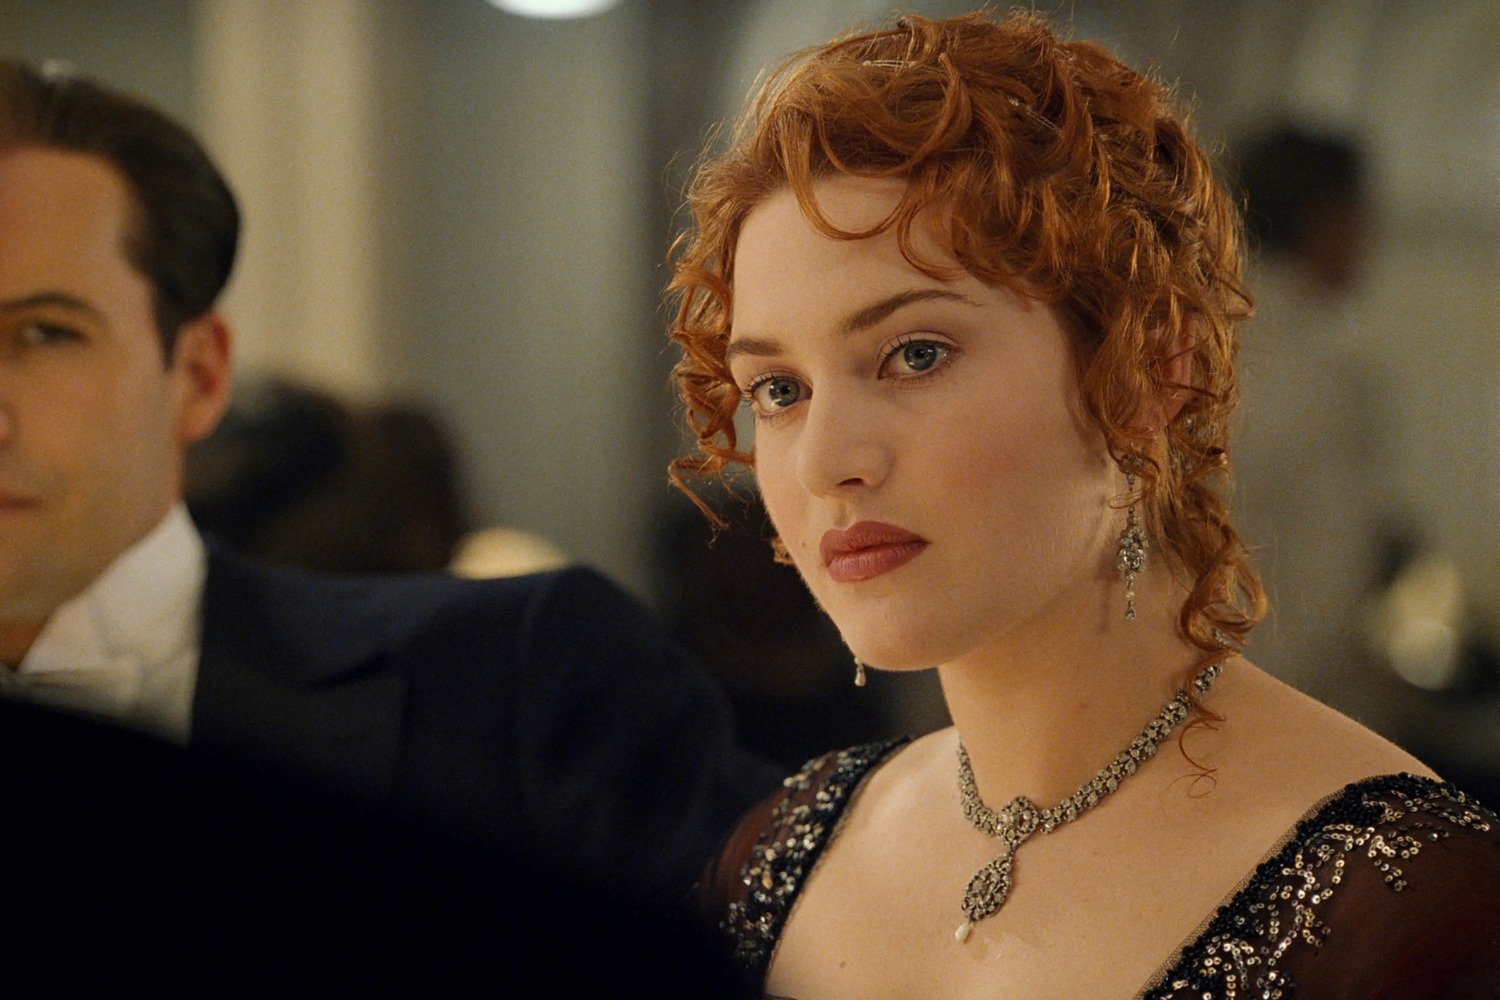 Shocking Age Difference Revealed: Kate Winslet’s Real Age Vs. Her Character’s Age In ‘Titanic’